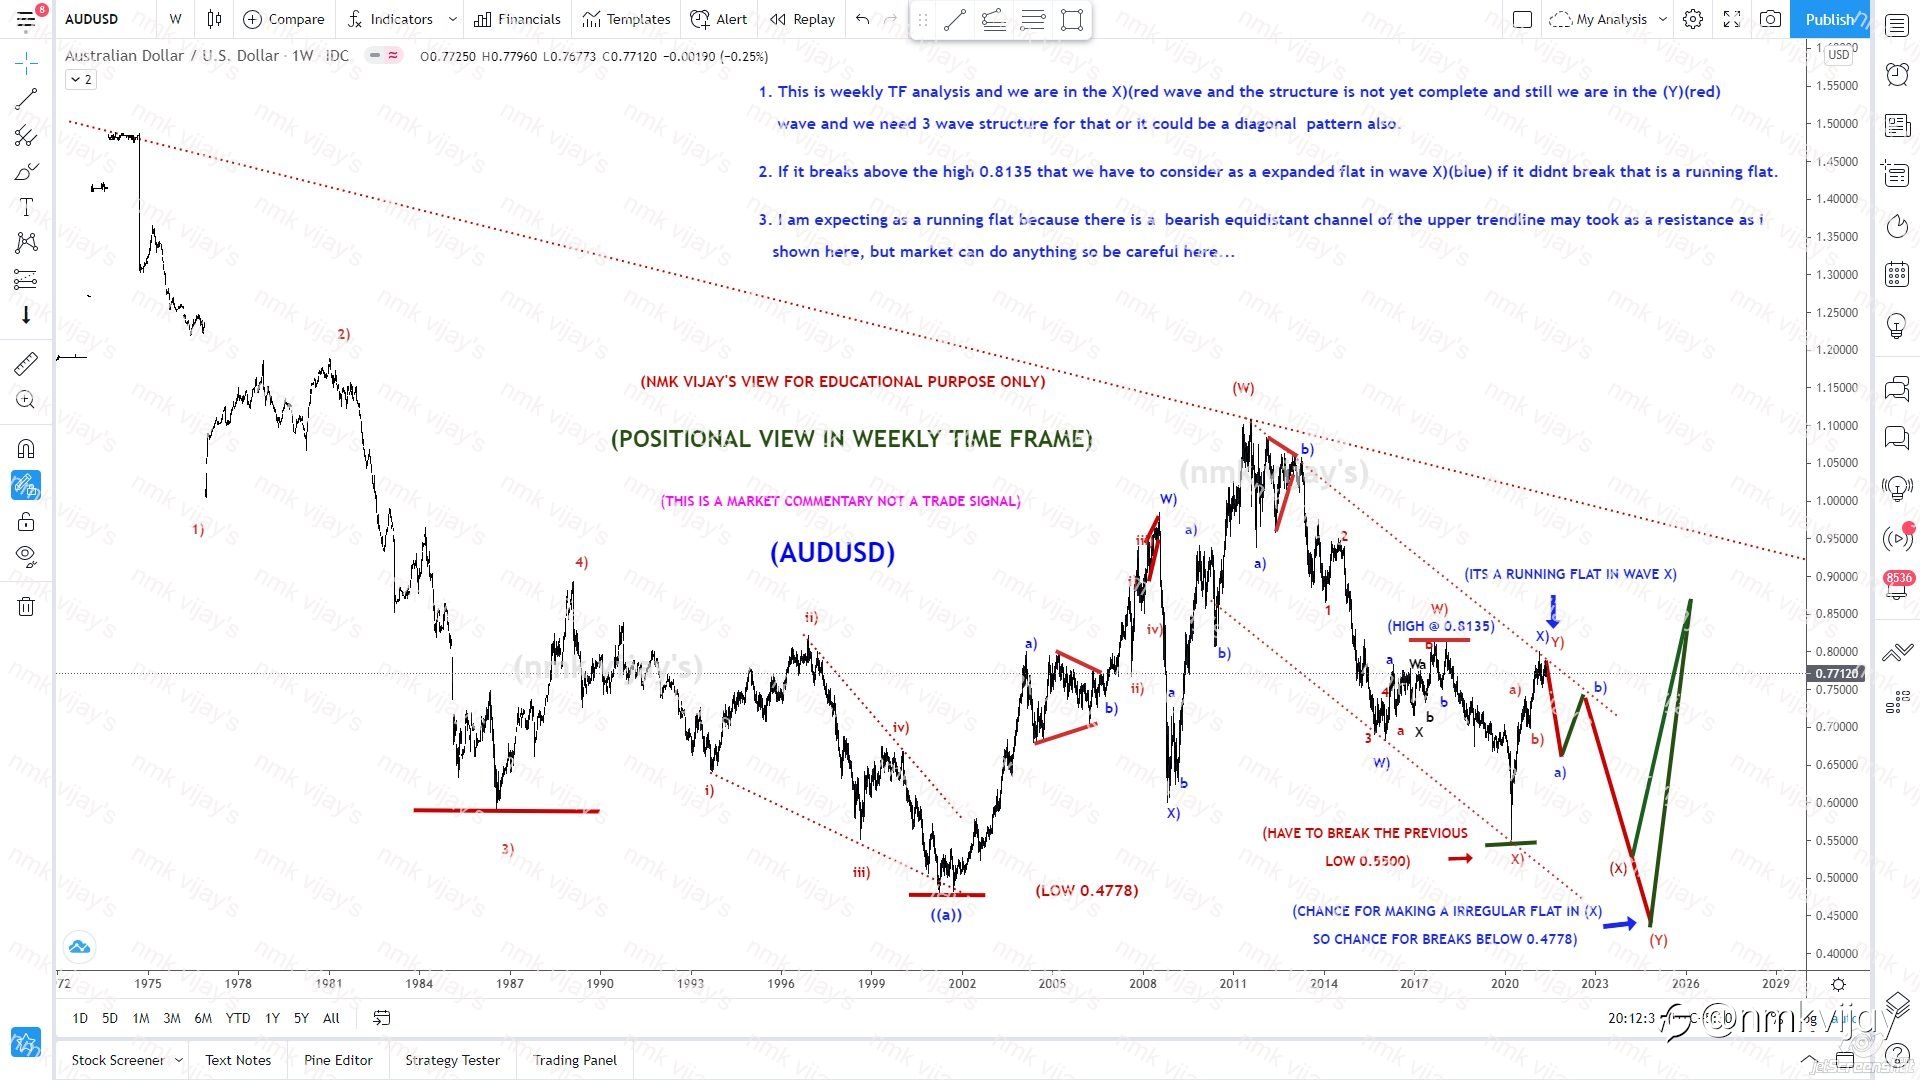 AUDUSD-Weekly TF analysis and you know well what i am expecting here about the next move...